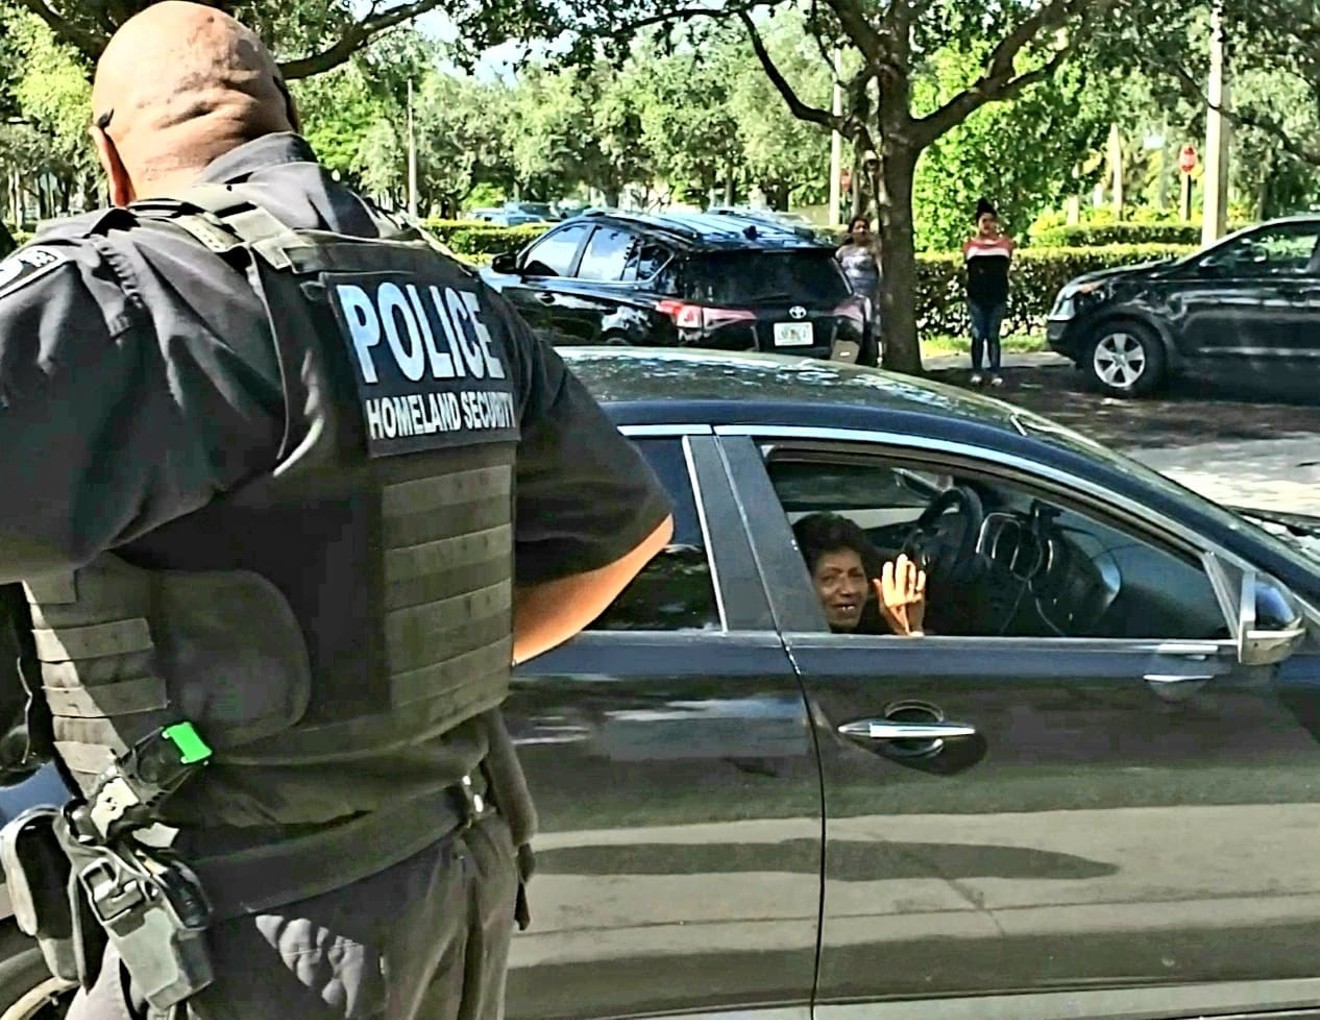 Wednesday, agents with Homeland Security's Federal Protective Service stopped drivers of color outside ICE's Miami-area office.